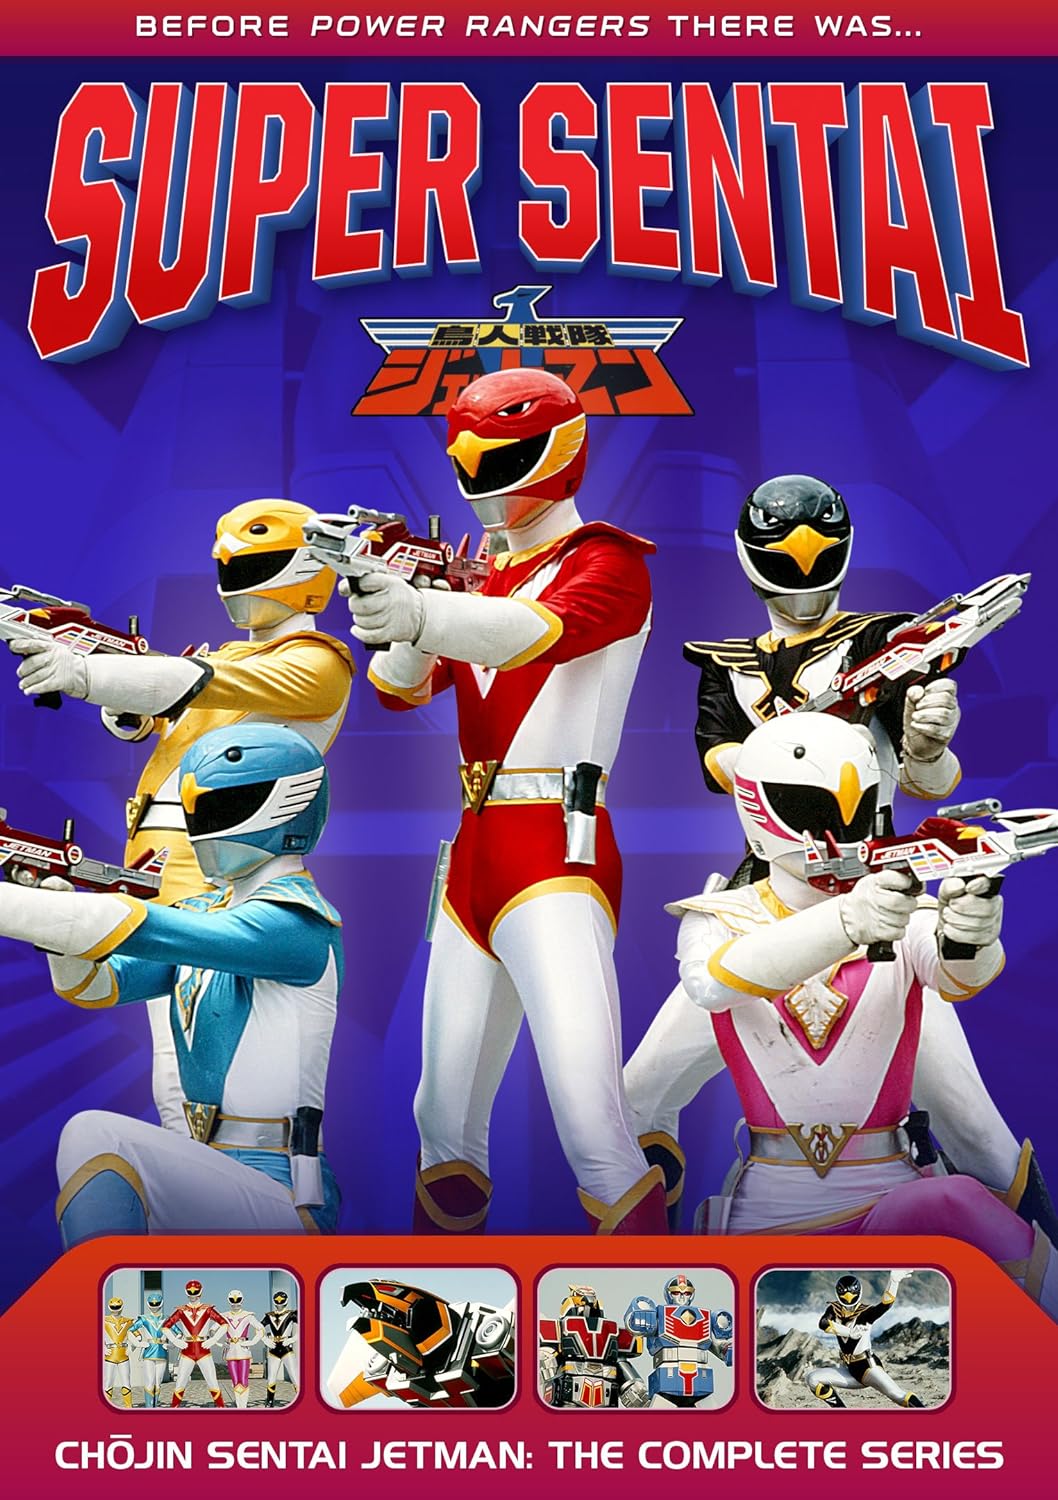 Power Rangers: Chojin Sentai Jetman-The Complete Series DVD - front cover